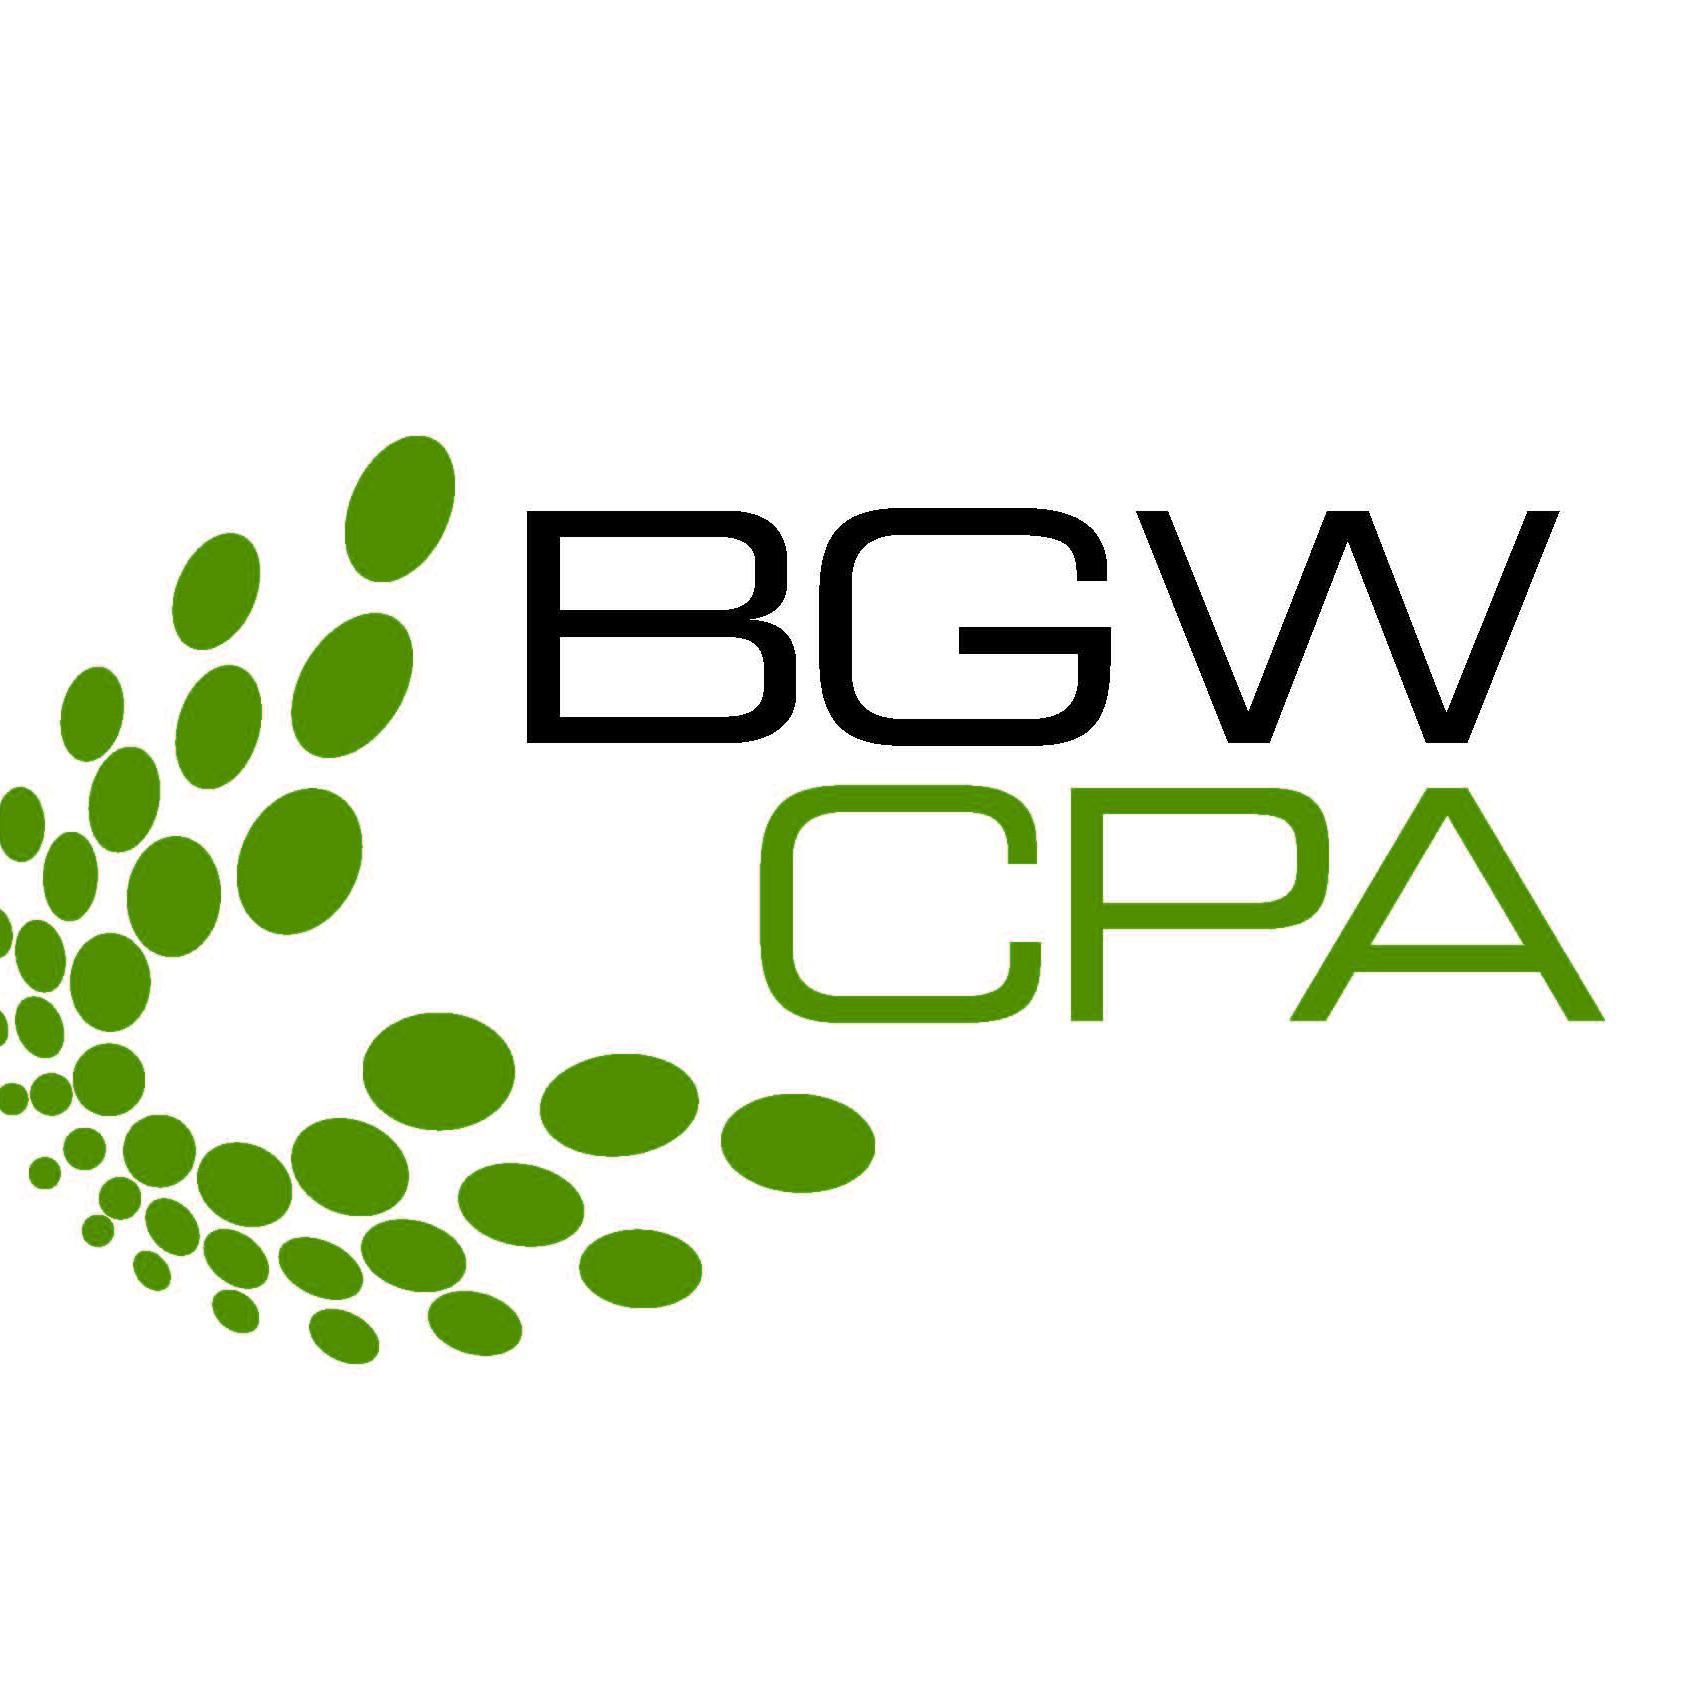 BGW CPA, PLLC provides business advisory and certified public accounting services to support the growth of private closely held businesses.